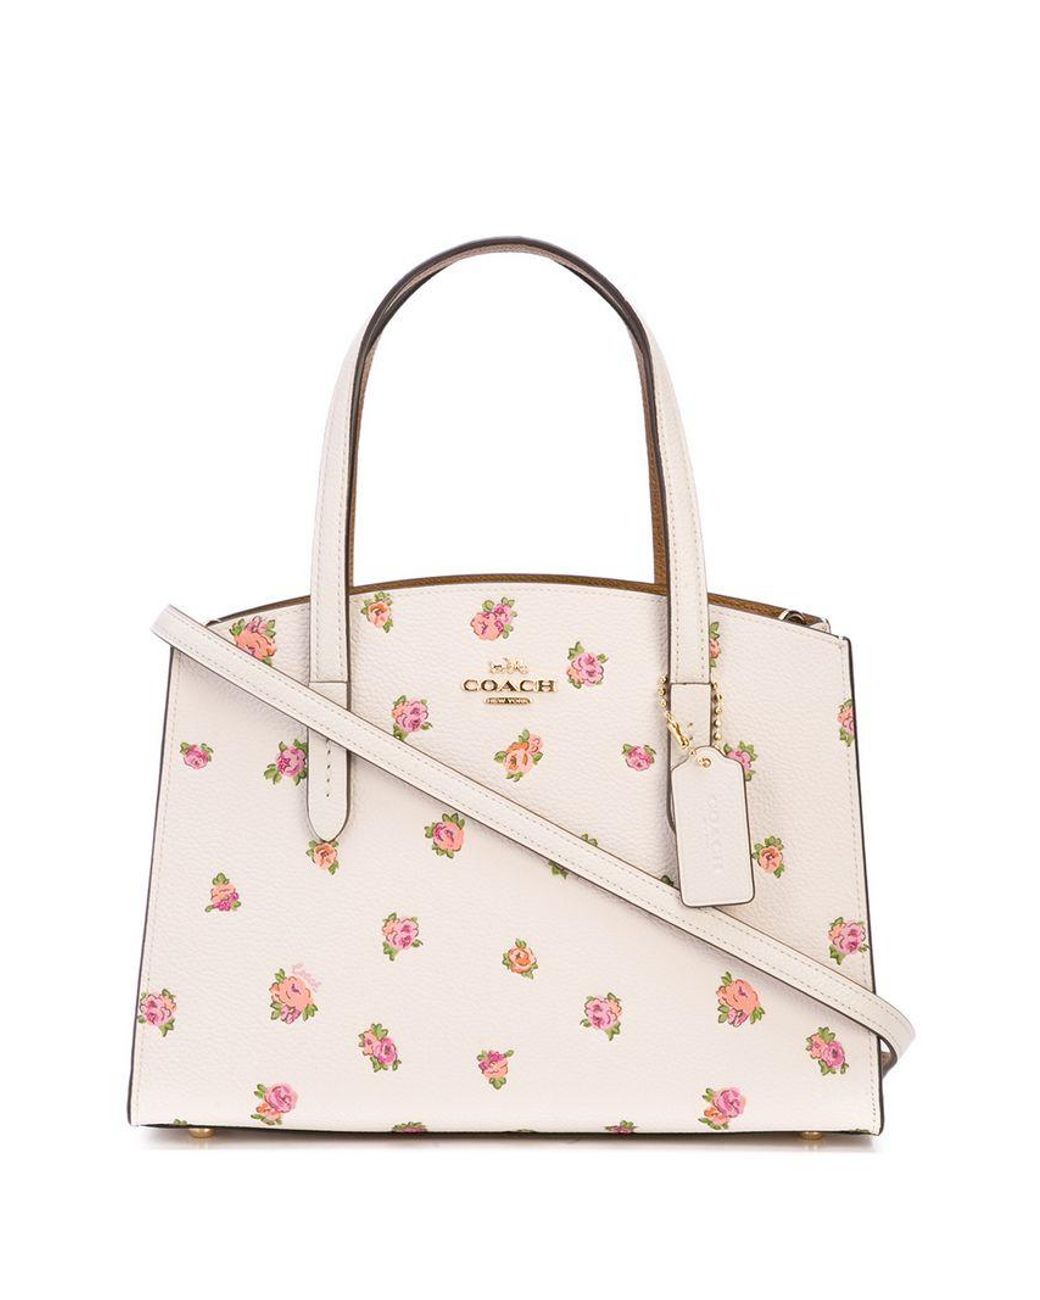 COACH Jumbo Floral Print Surrey Carryall Black Cherry/Multi One Size :  Amazon.in: Home & Kitchen